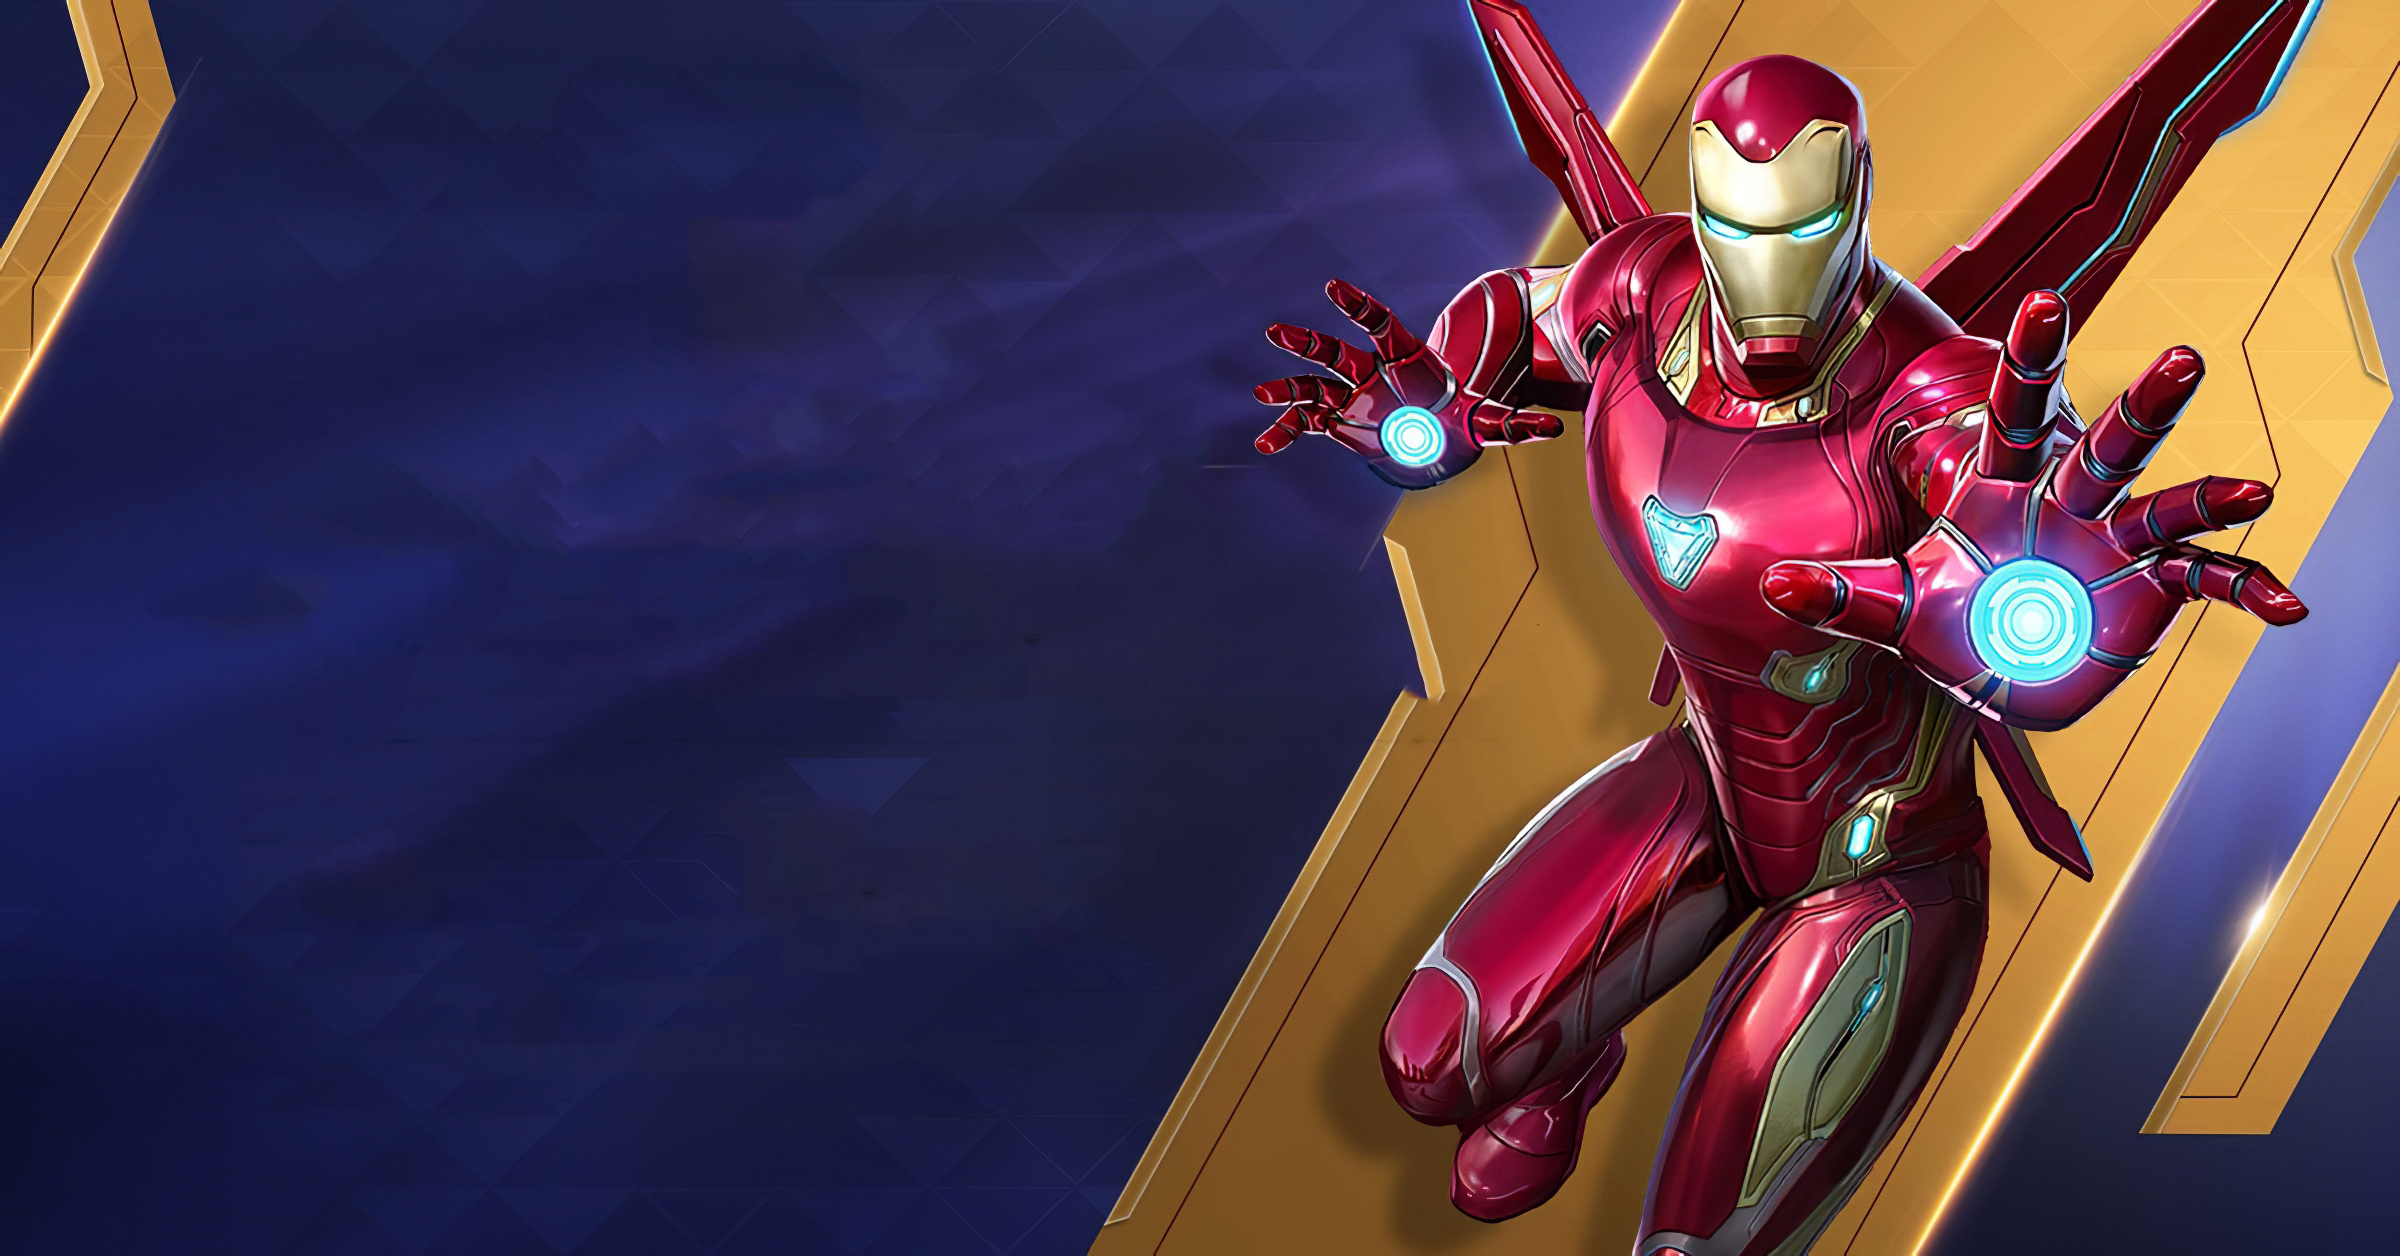 1360x768 Marvel Avengers Iron Man Desktop Laptop Hd Wallpaper Hd Games 4k Wallpapers Images Photos And Background